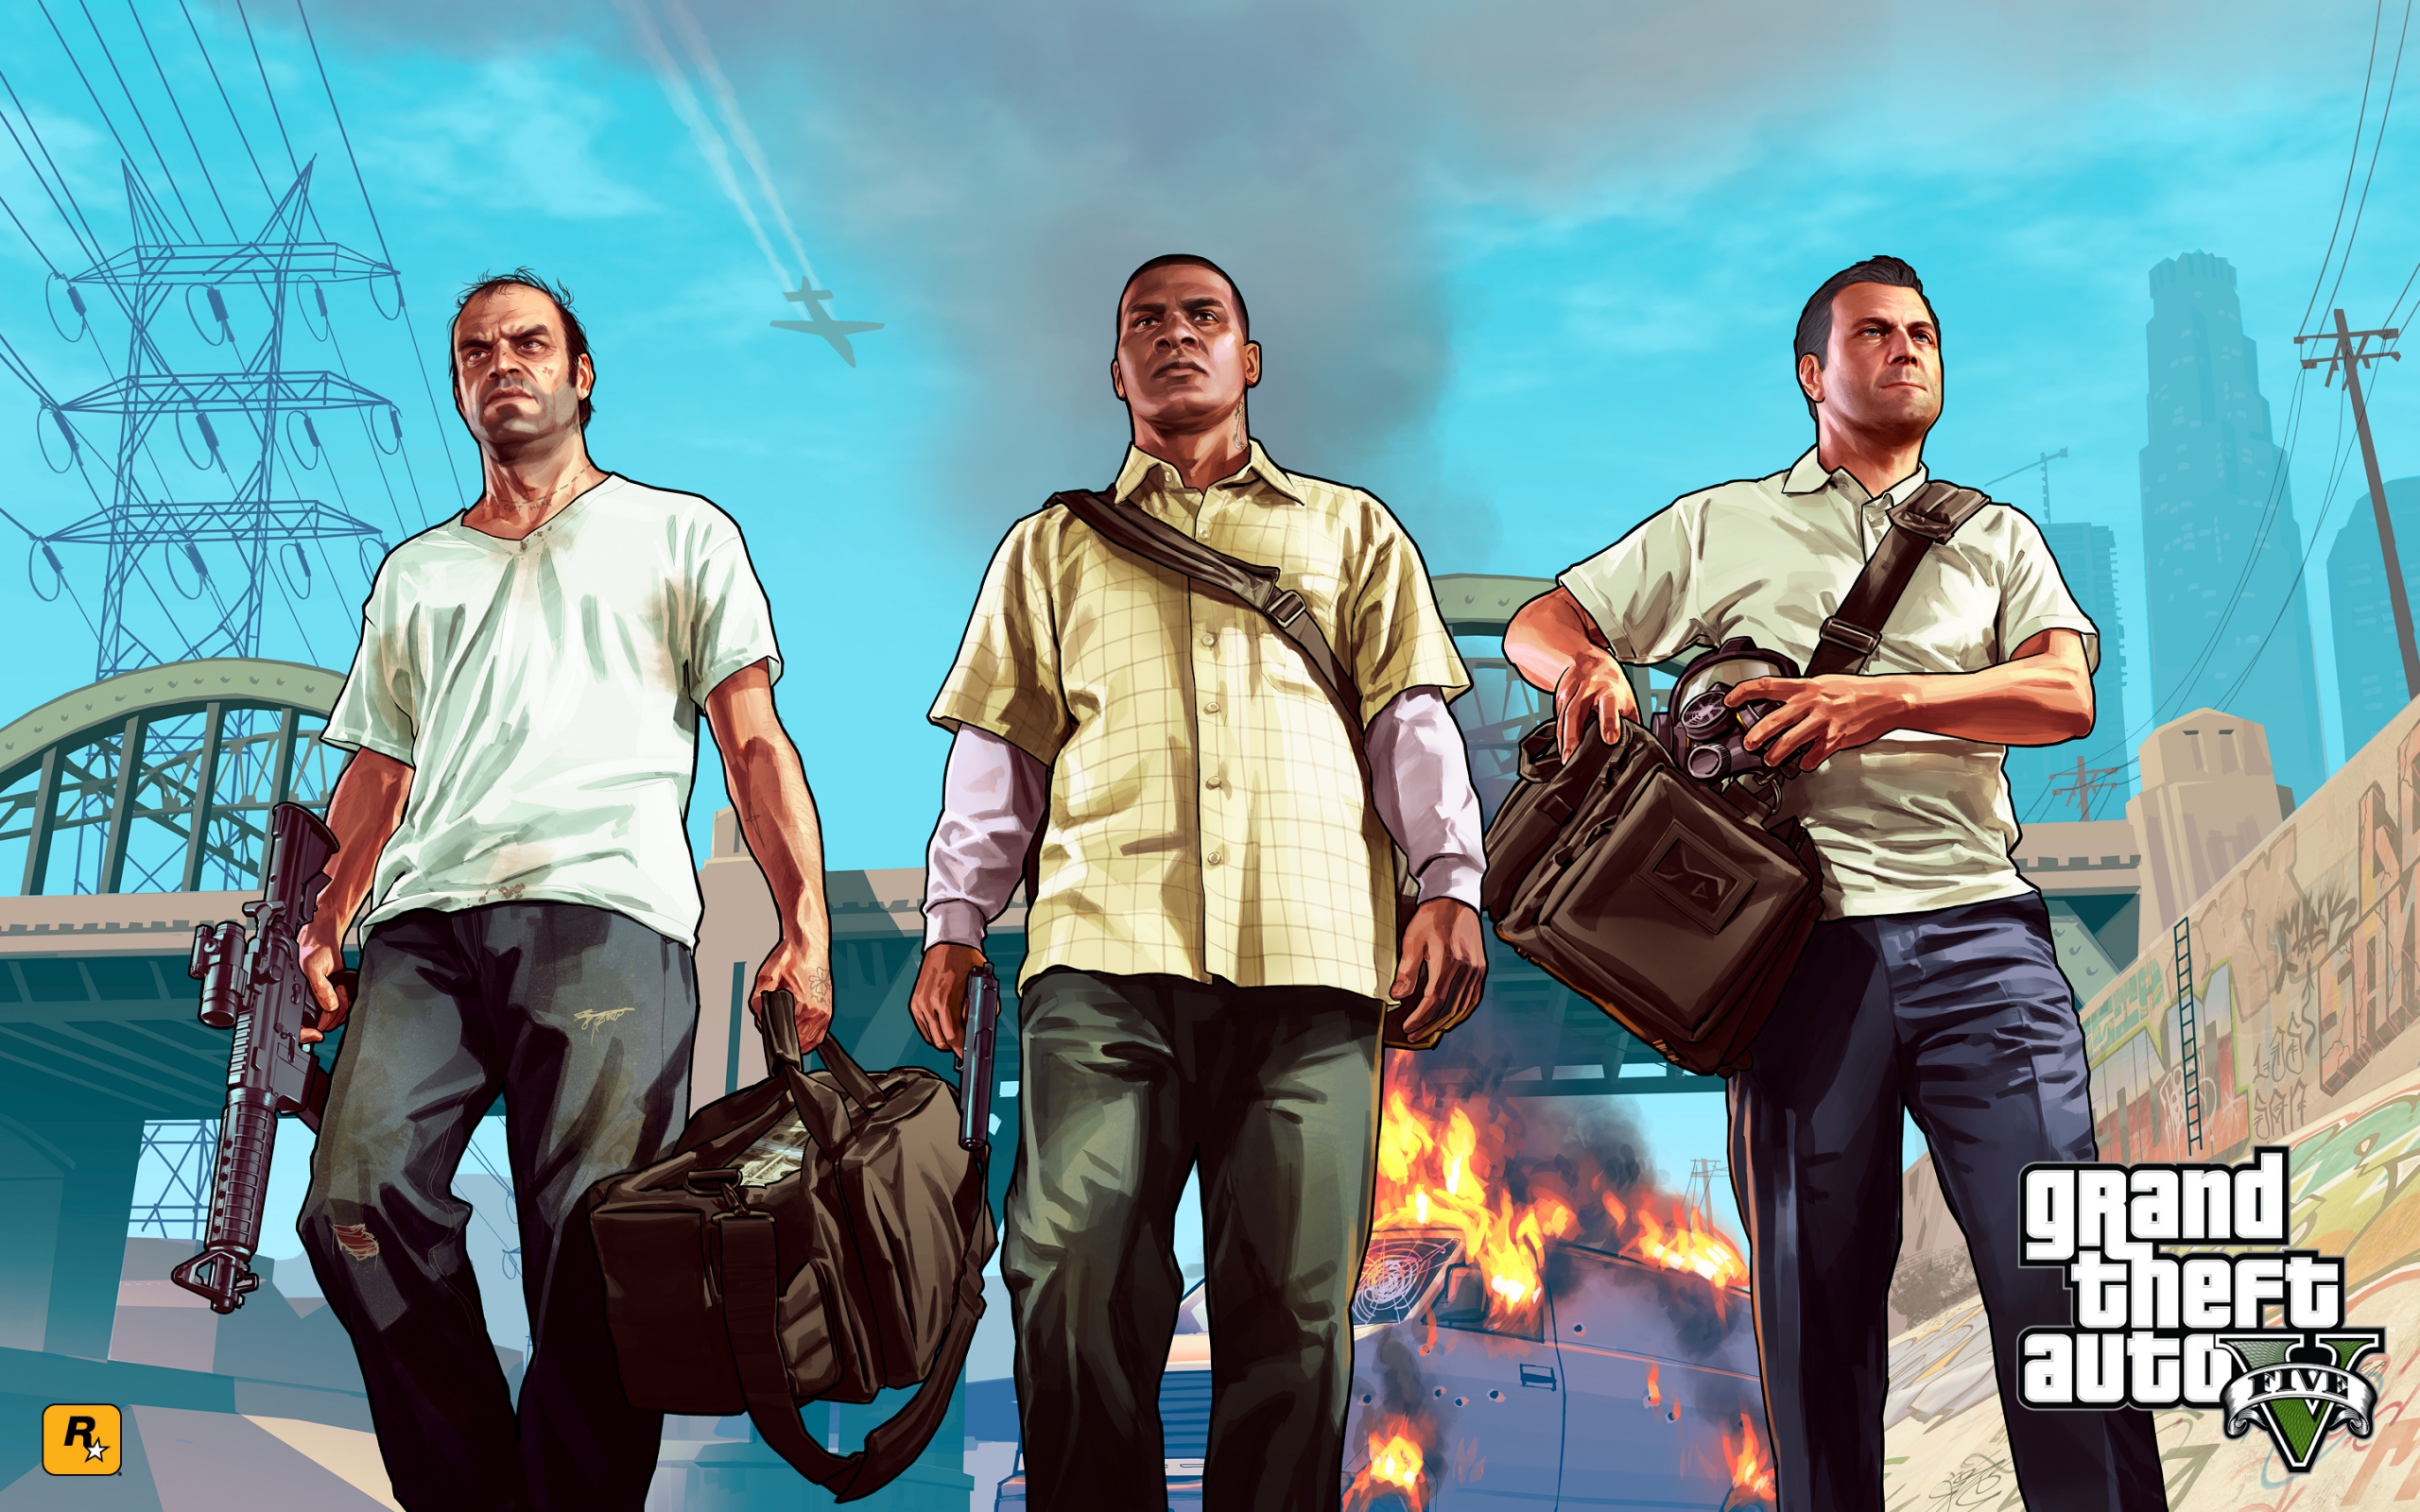 Grand Theft Auto Vice City for 2560 x 1600 widescreen resolution